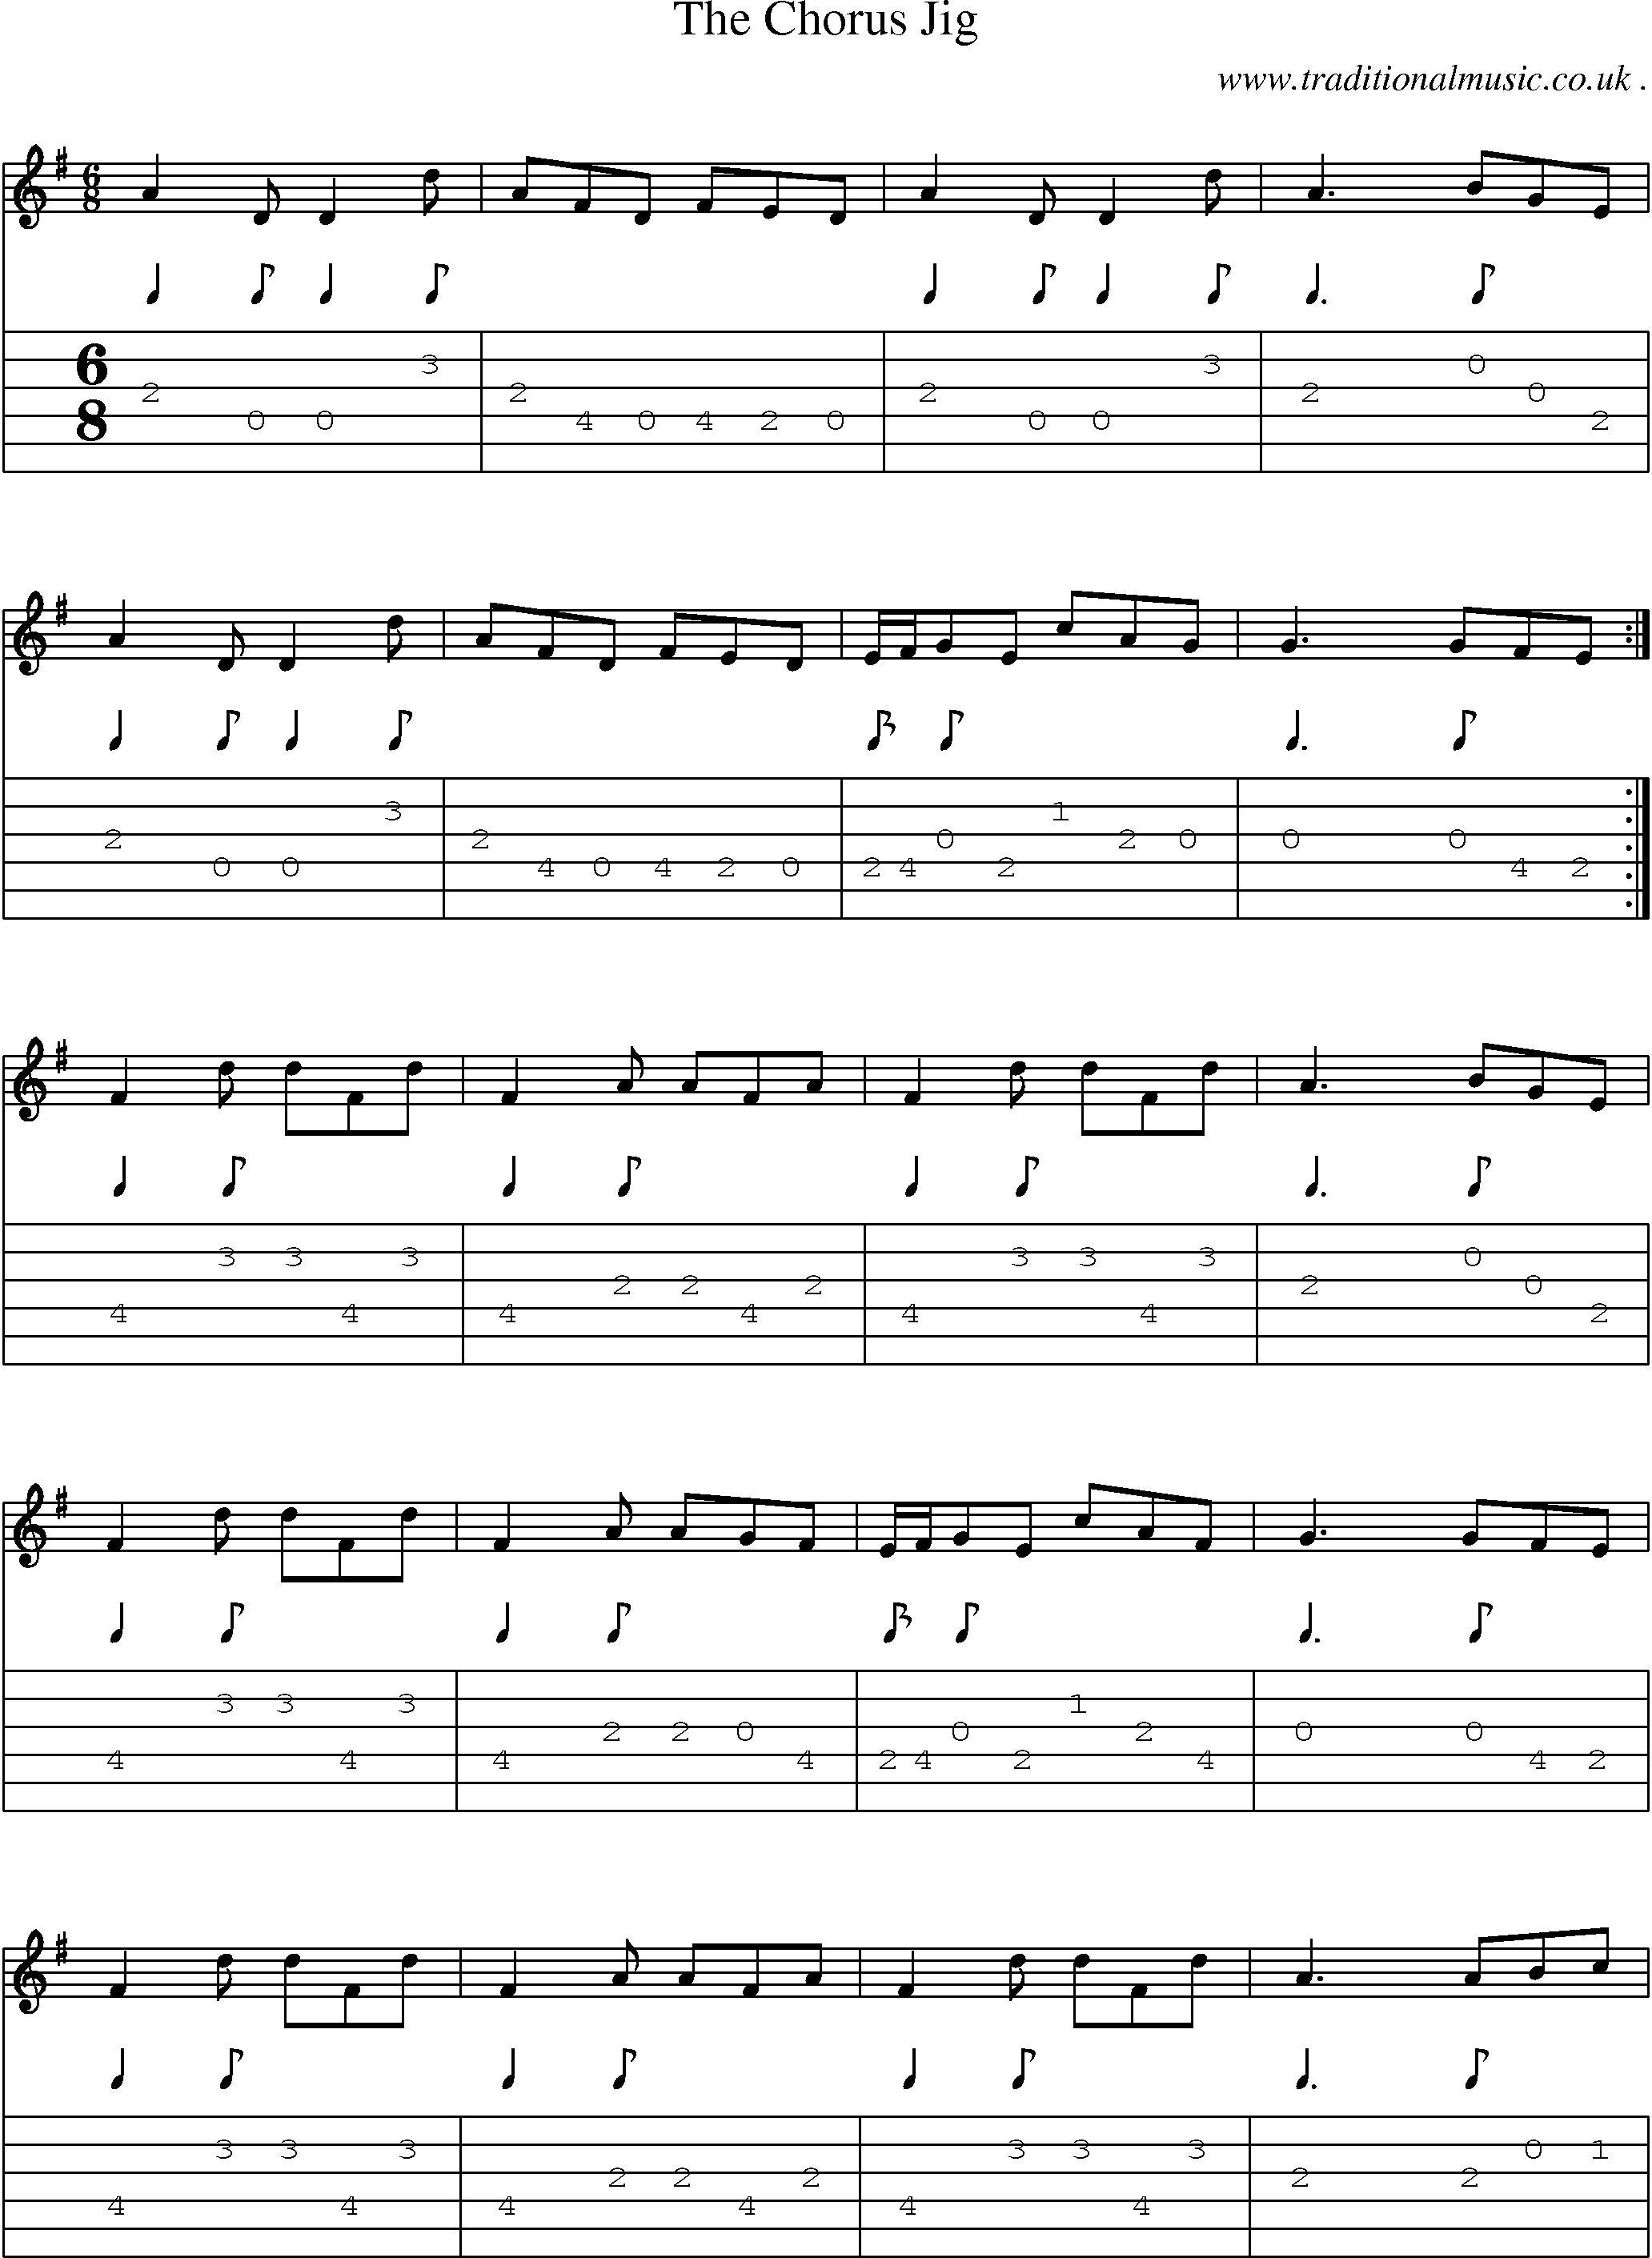 Sheet-Music and Guitar Tabs for The Chorus Jig